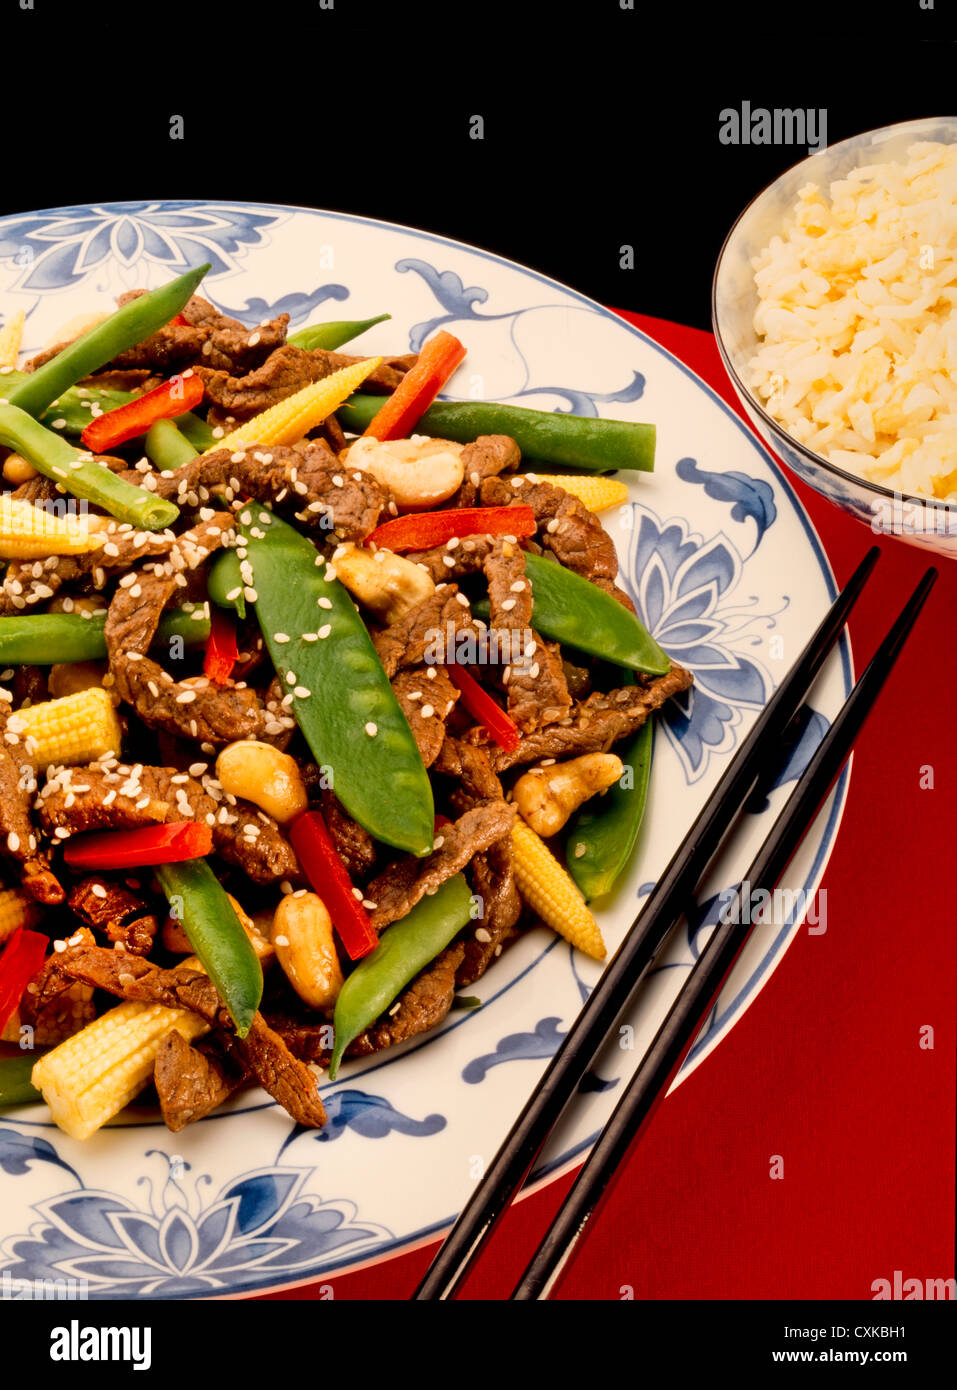 BEEF STIR FRY WITH MANGE TOUT,CASHEW NUTS AND BABY SWEETCORN Stock Photo